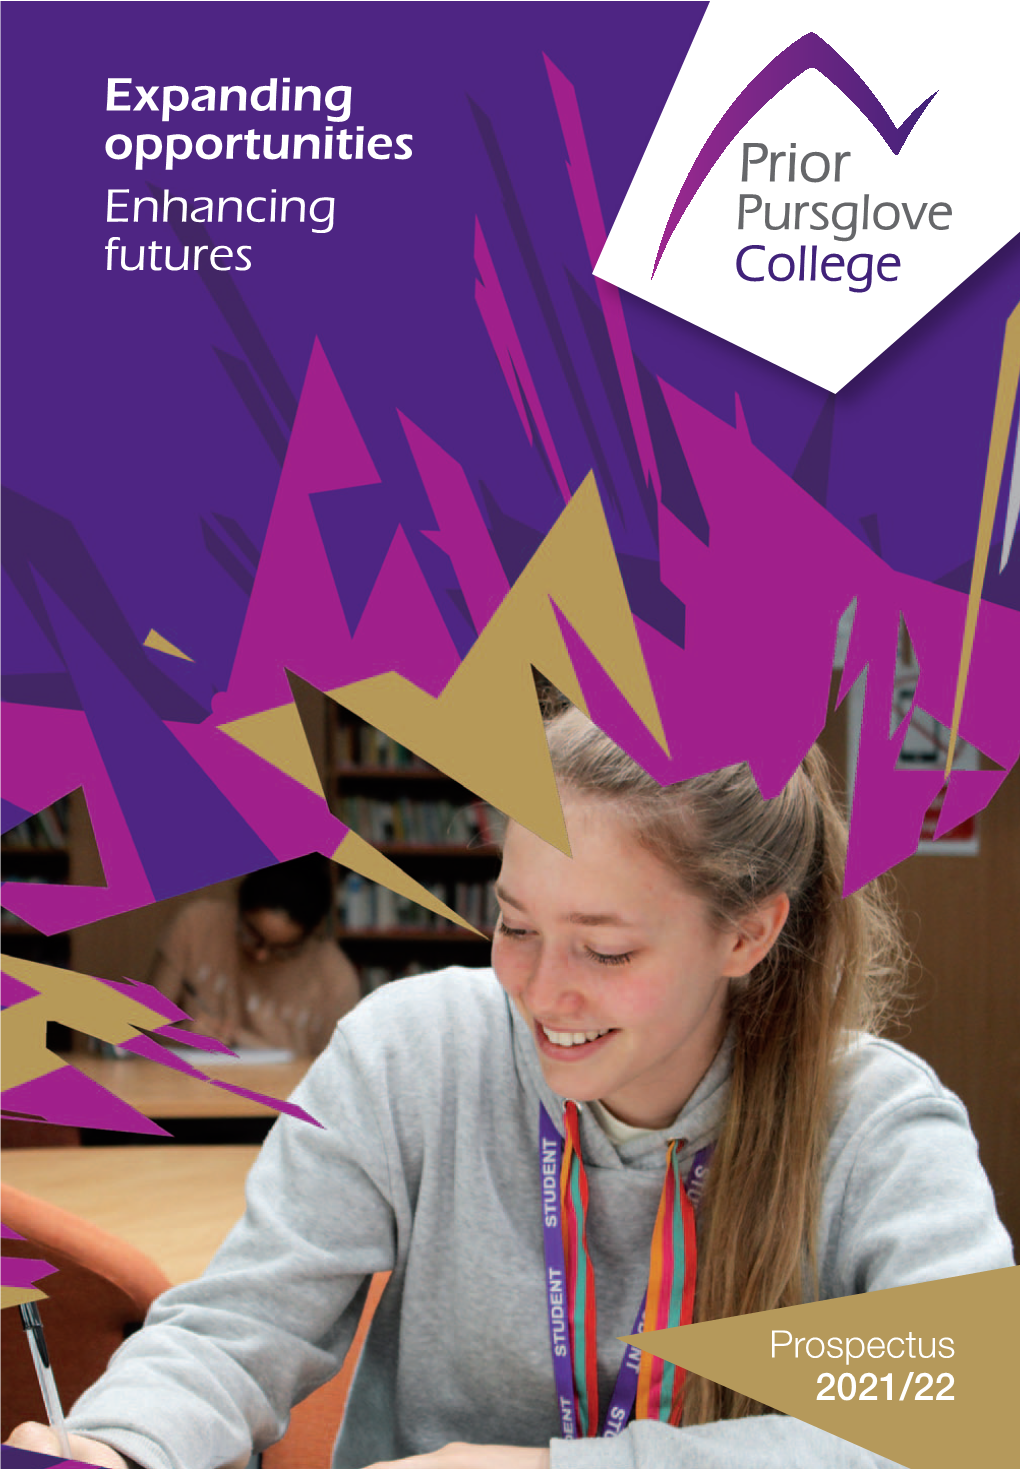 Prospectus 2021/22 Hello from the Principal 2021/22 Course Contents